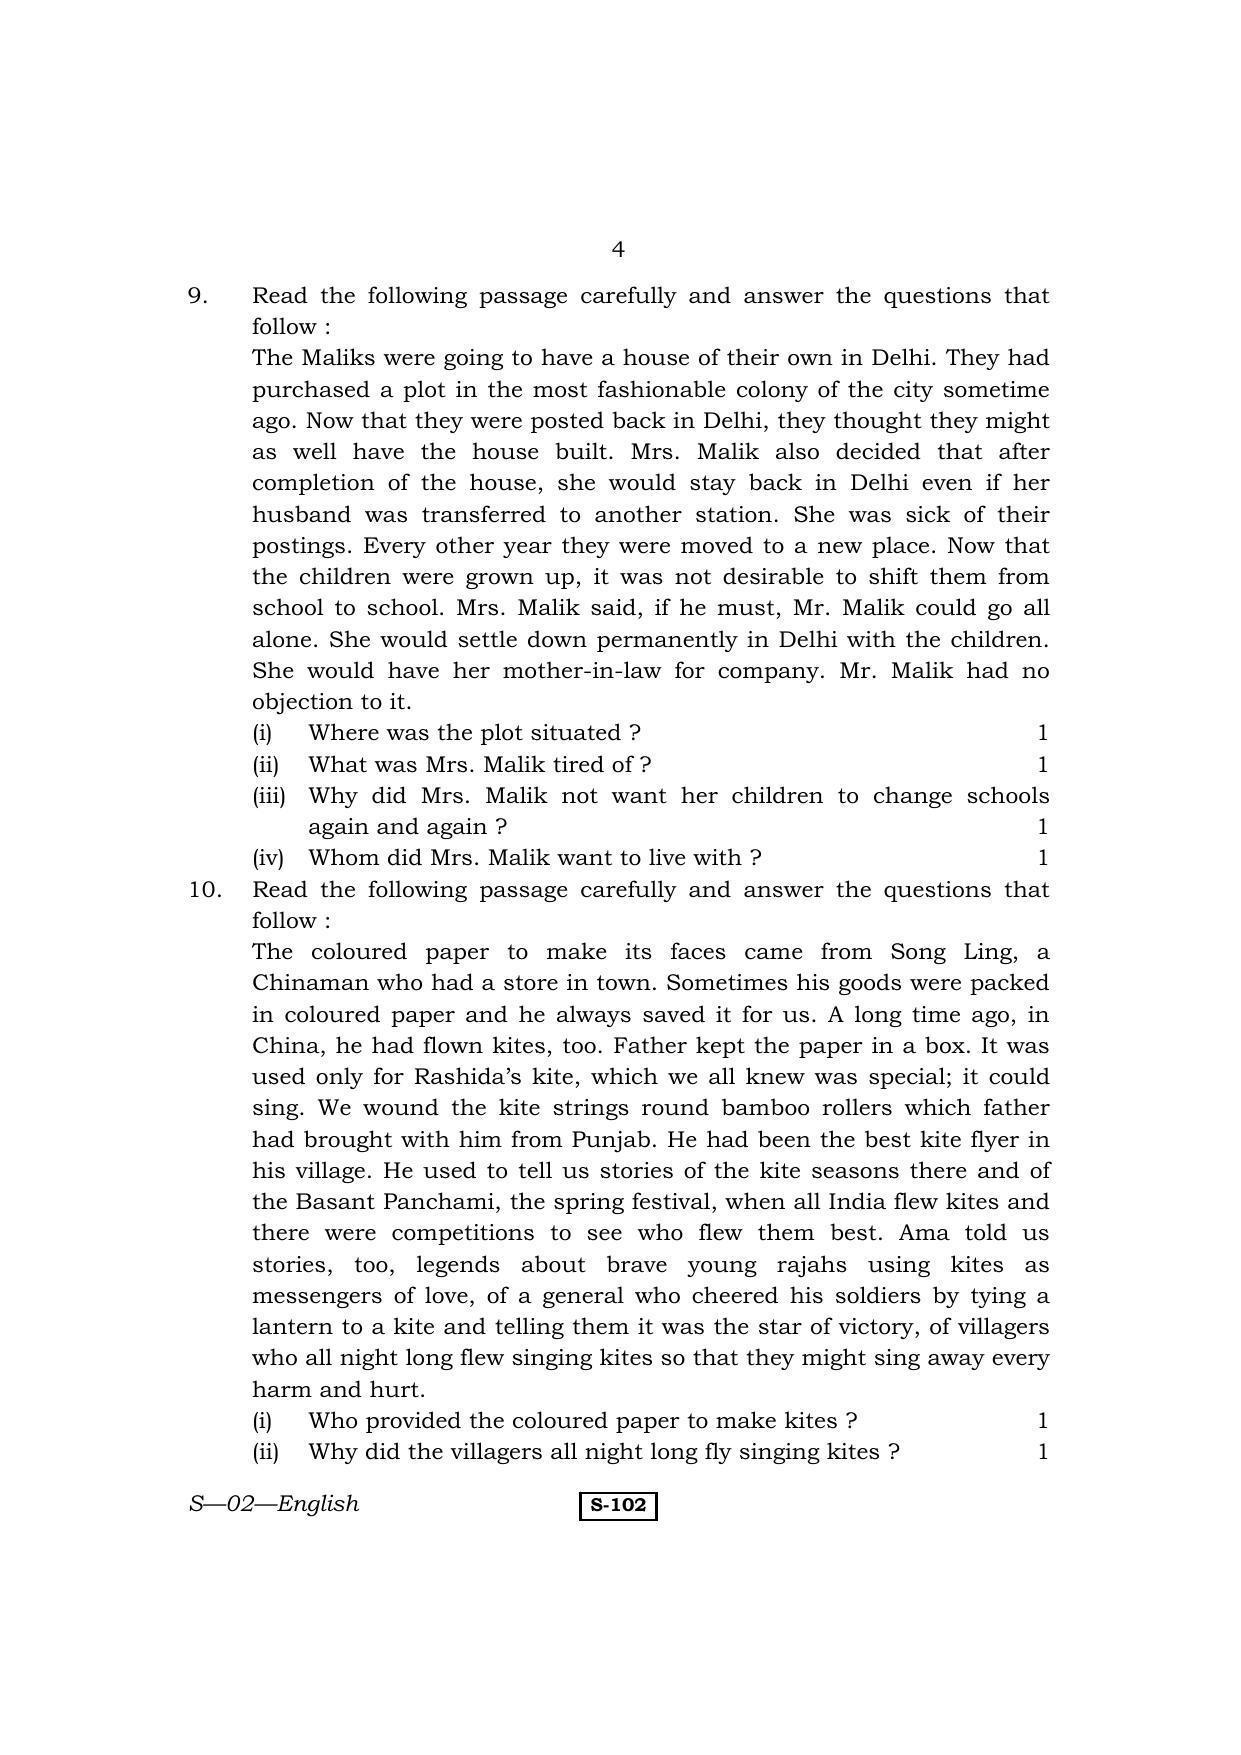 RBSE Class 10 English 2011 Question Paper - Page 4